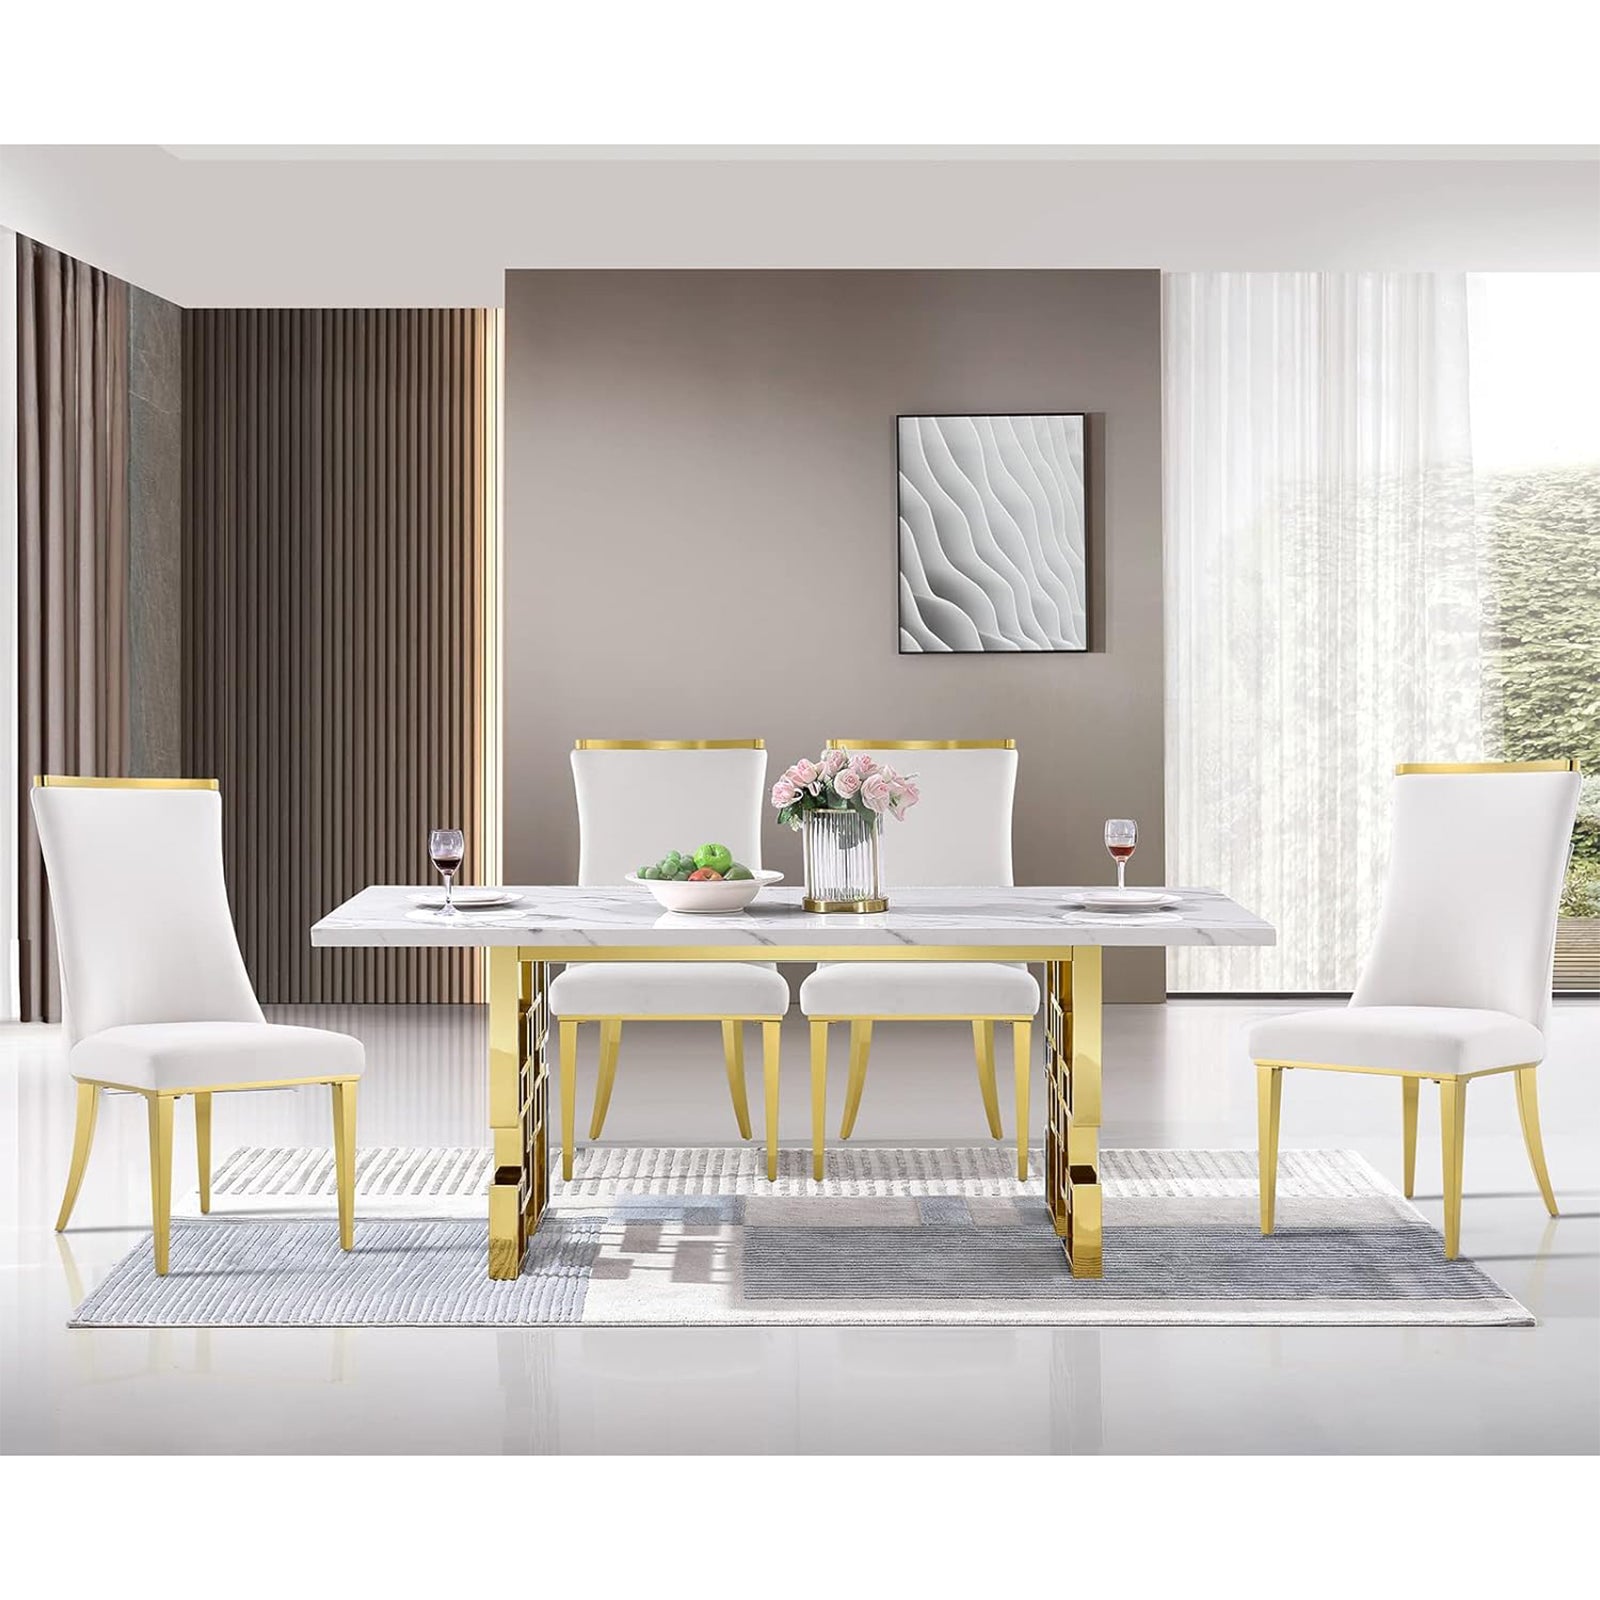 Wholesale White Velvet Dining Chairs with Reticulate Texture Back and Gold Stainless Steel Legs